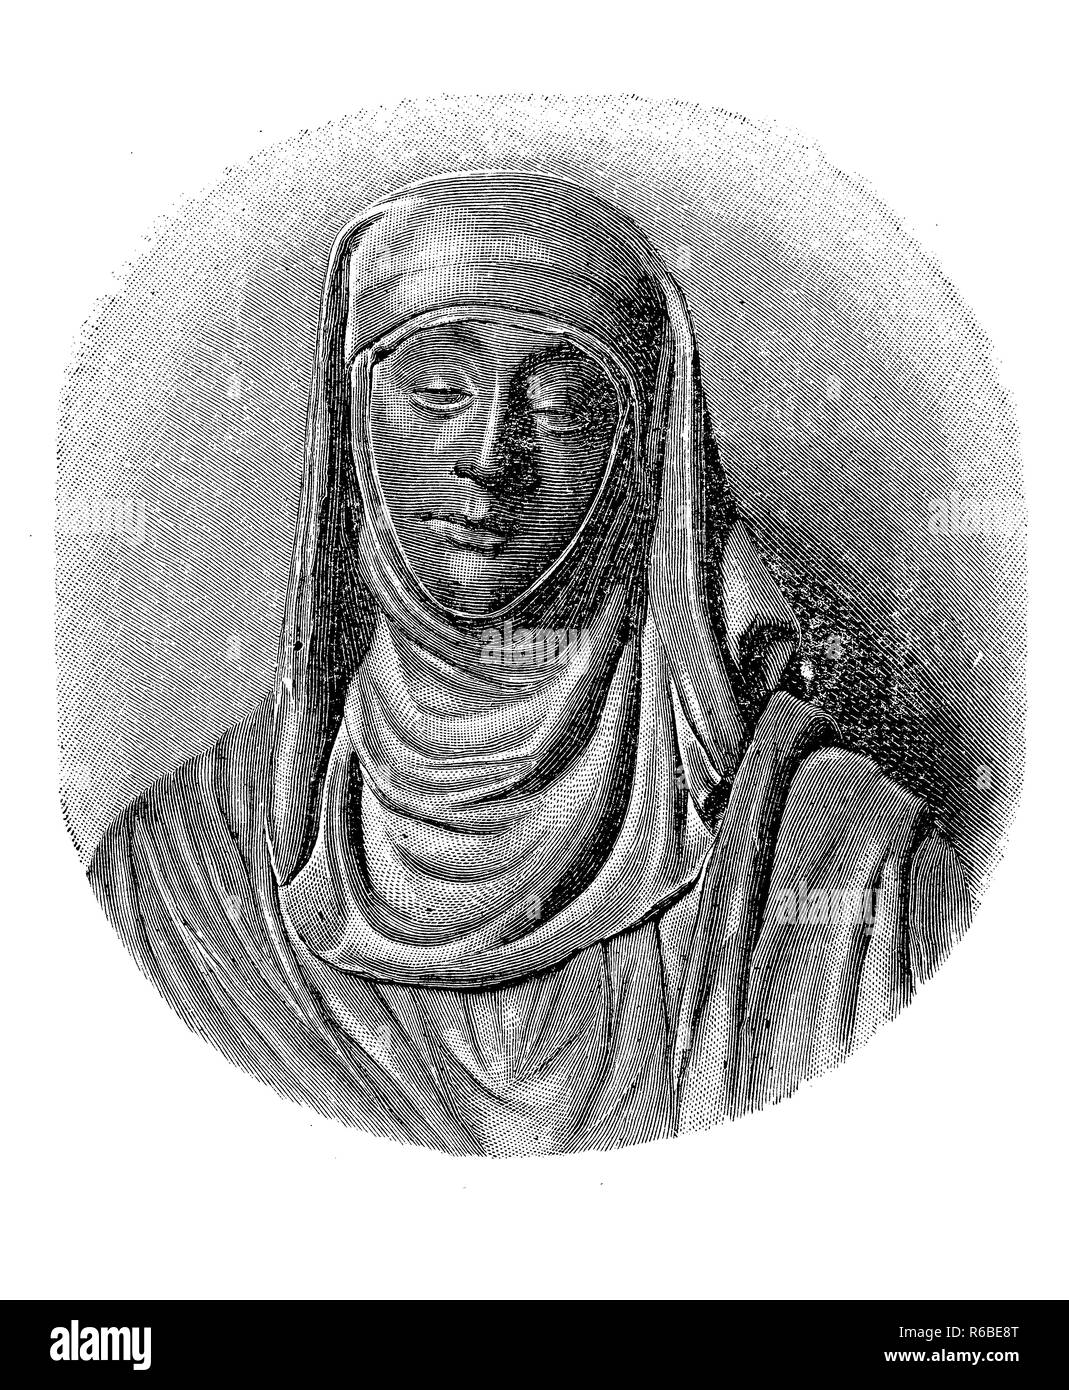 Vintage engraving portrait of saint Catherine of Siena (1347 - 1380)  tertiary of the Dominican Order, Scholastic philosopher and theologian Stock Photo